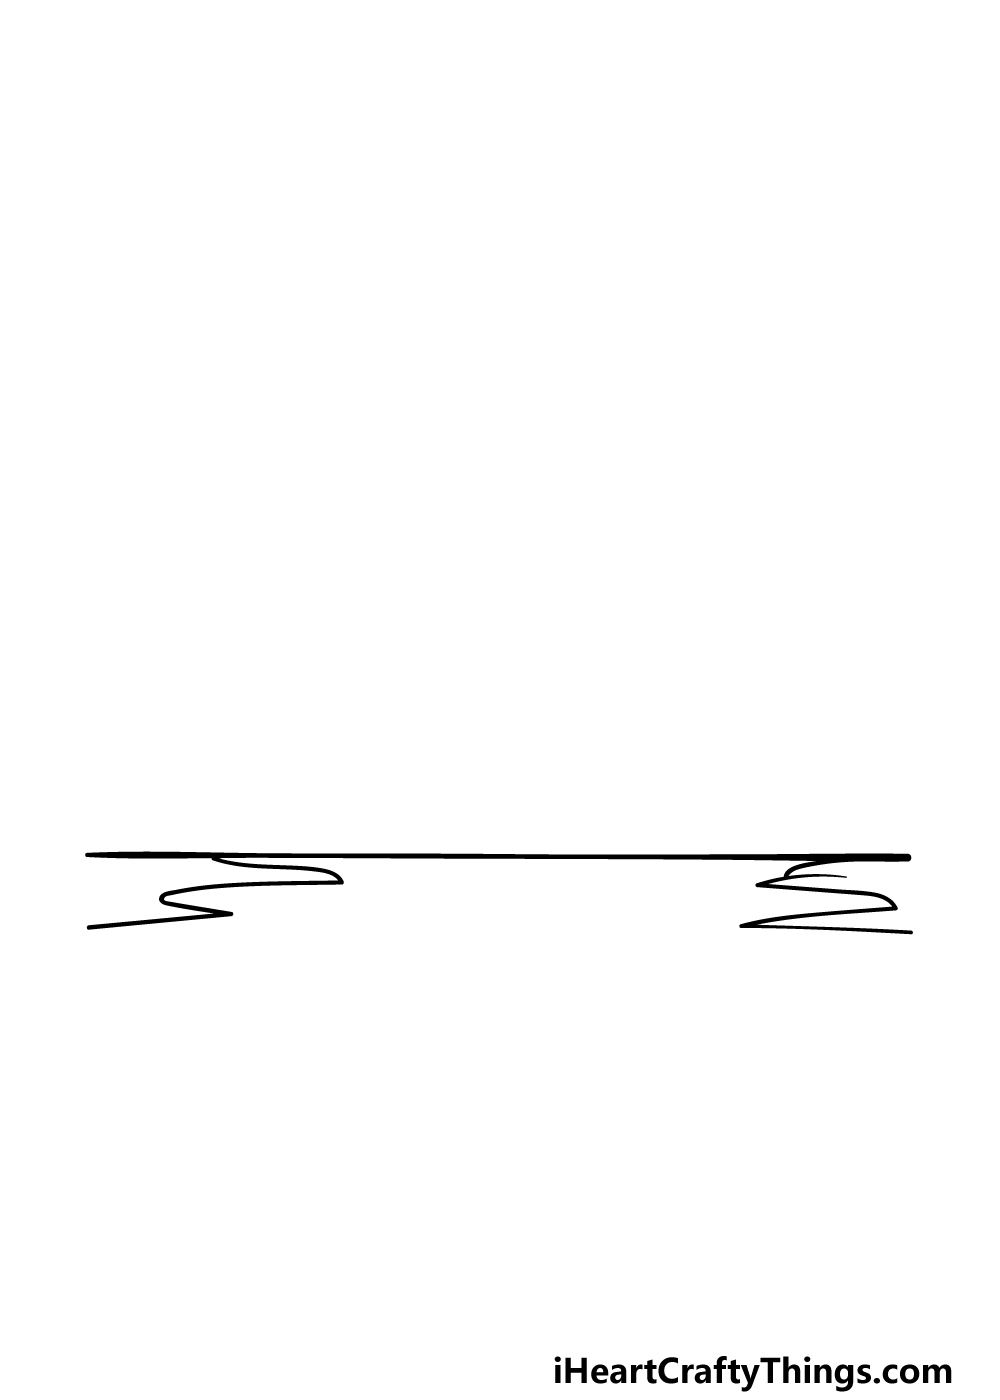 how to draw a Simple Landscape step 1